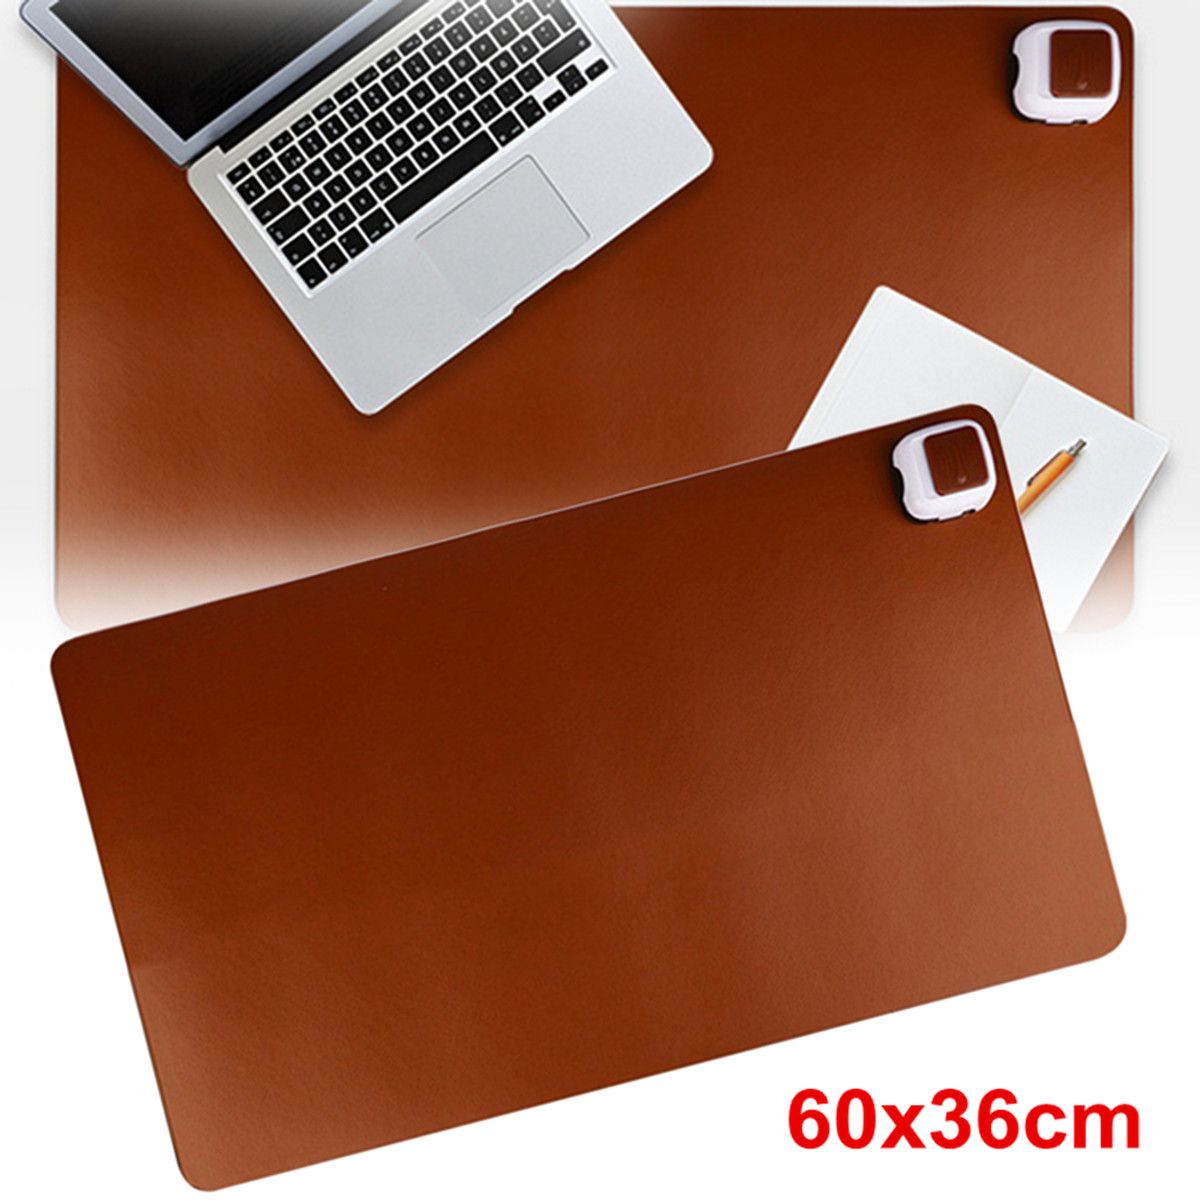 600360mm-220V-Electric-Warming-Large-PU-Leather-Mouse-Pad-Desktop-Pad-1273738